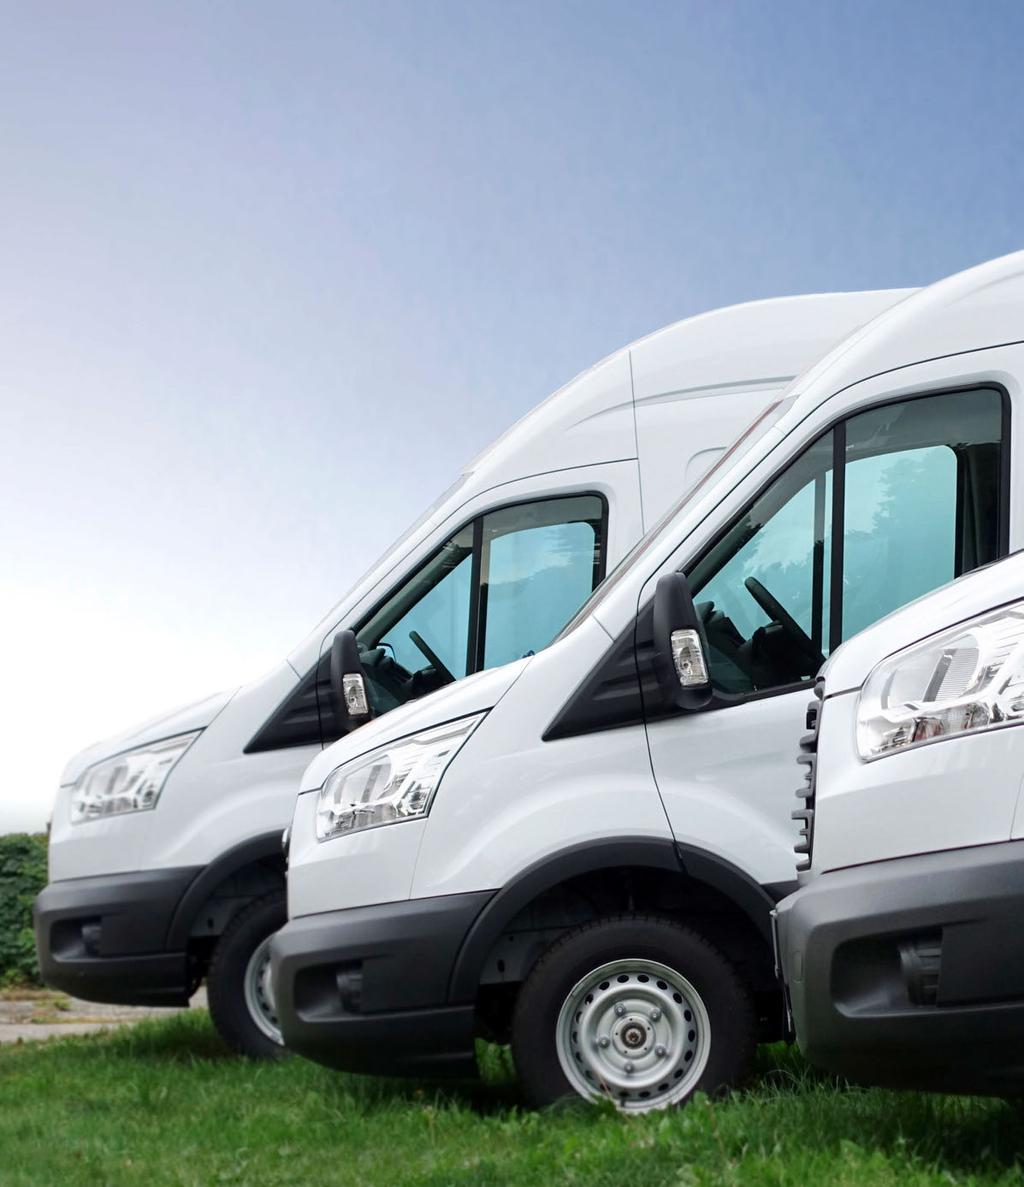 A GUIDE TO COMMERCIAL VEHICLE SELECTION for Fleet Managers Arval Consulting is an award-winning independent business unit within Arval, dedicated to delivering tangible results and added value for